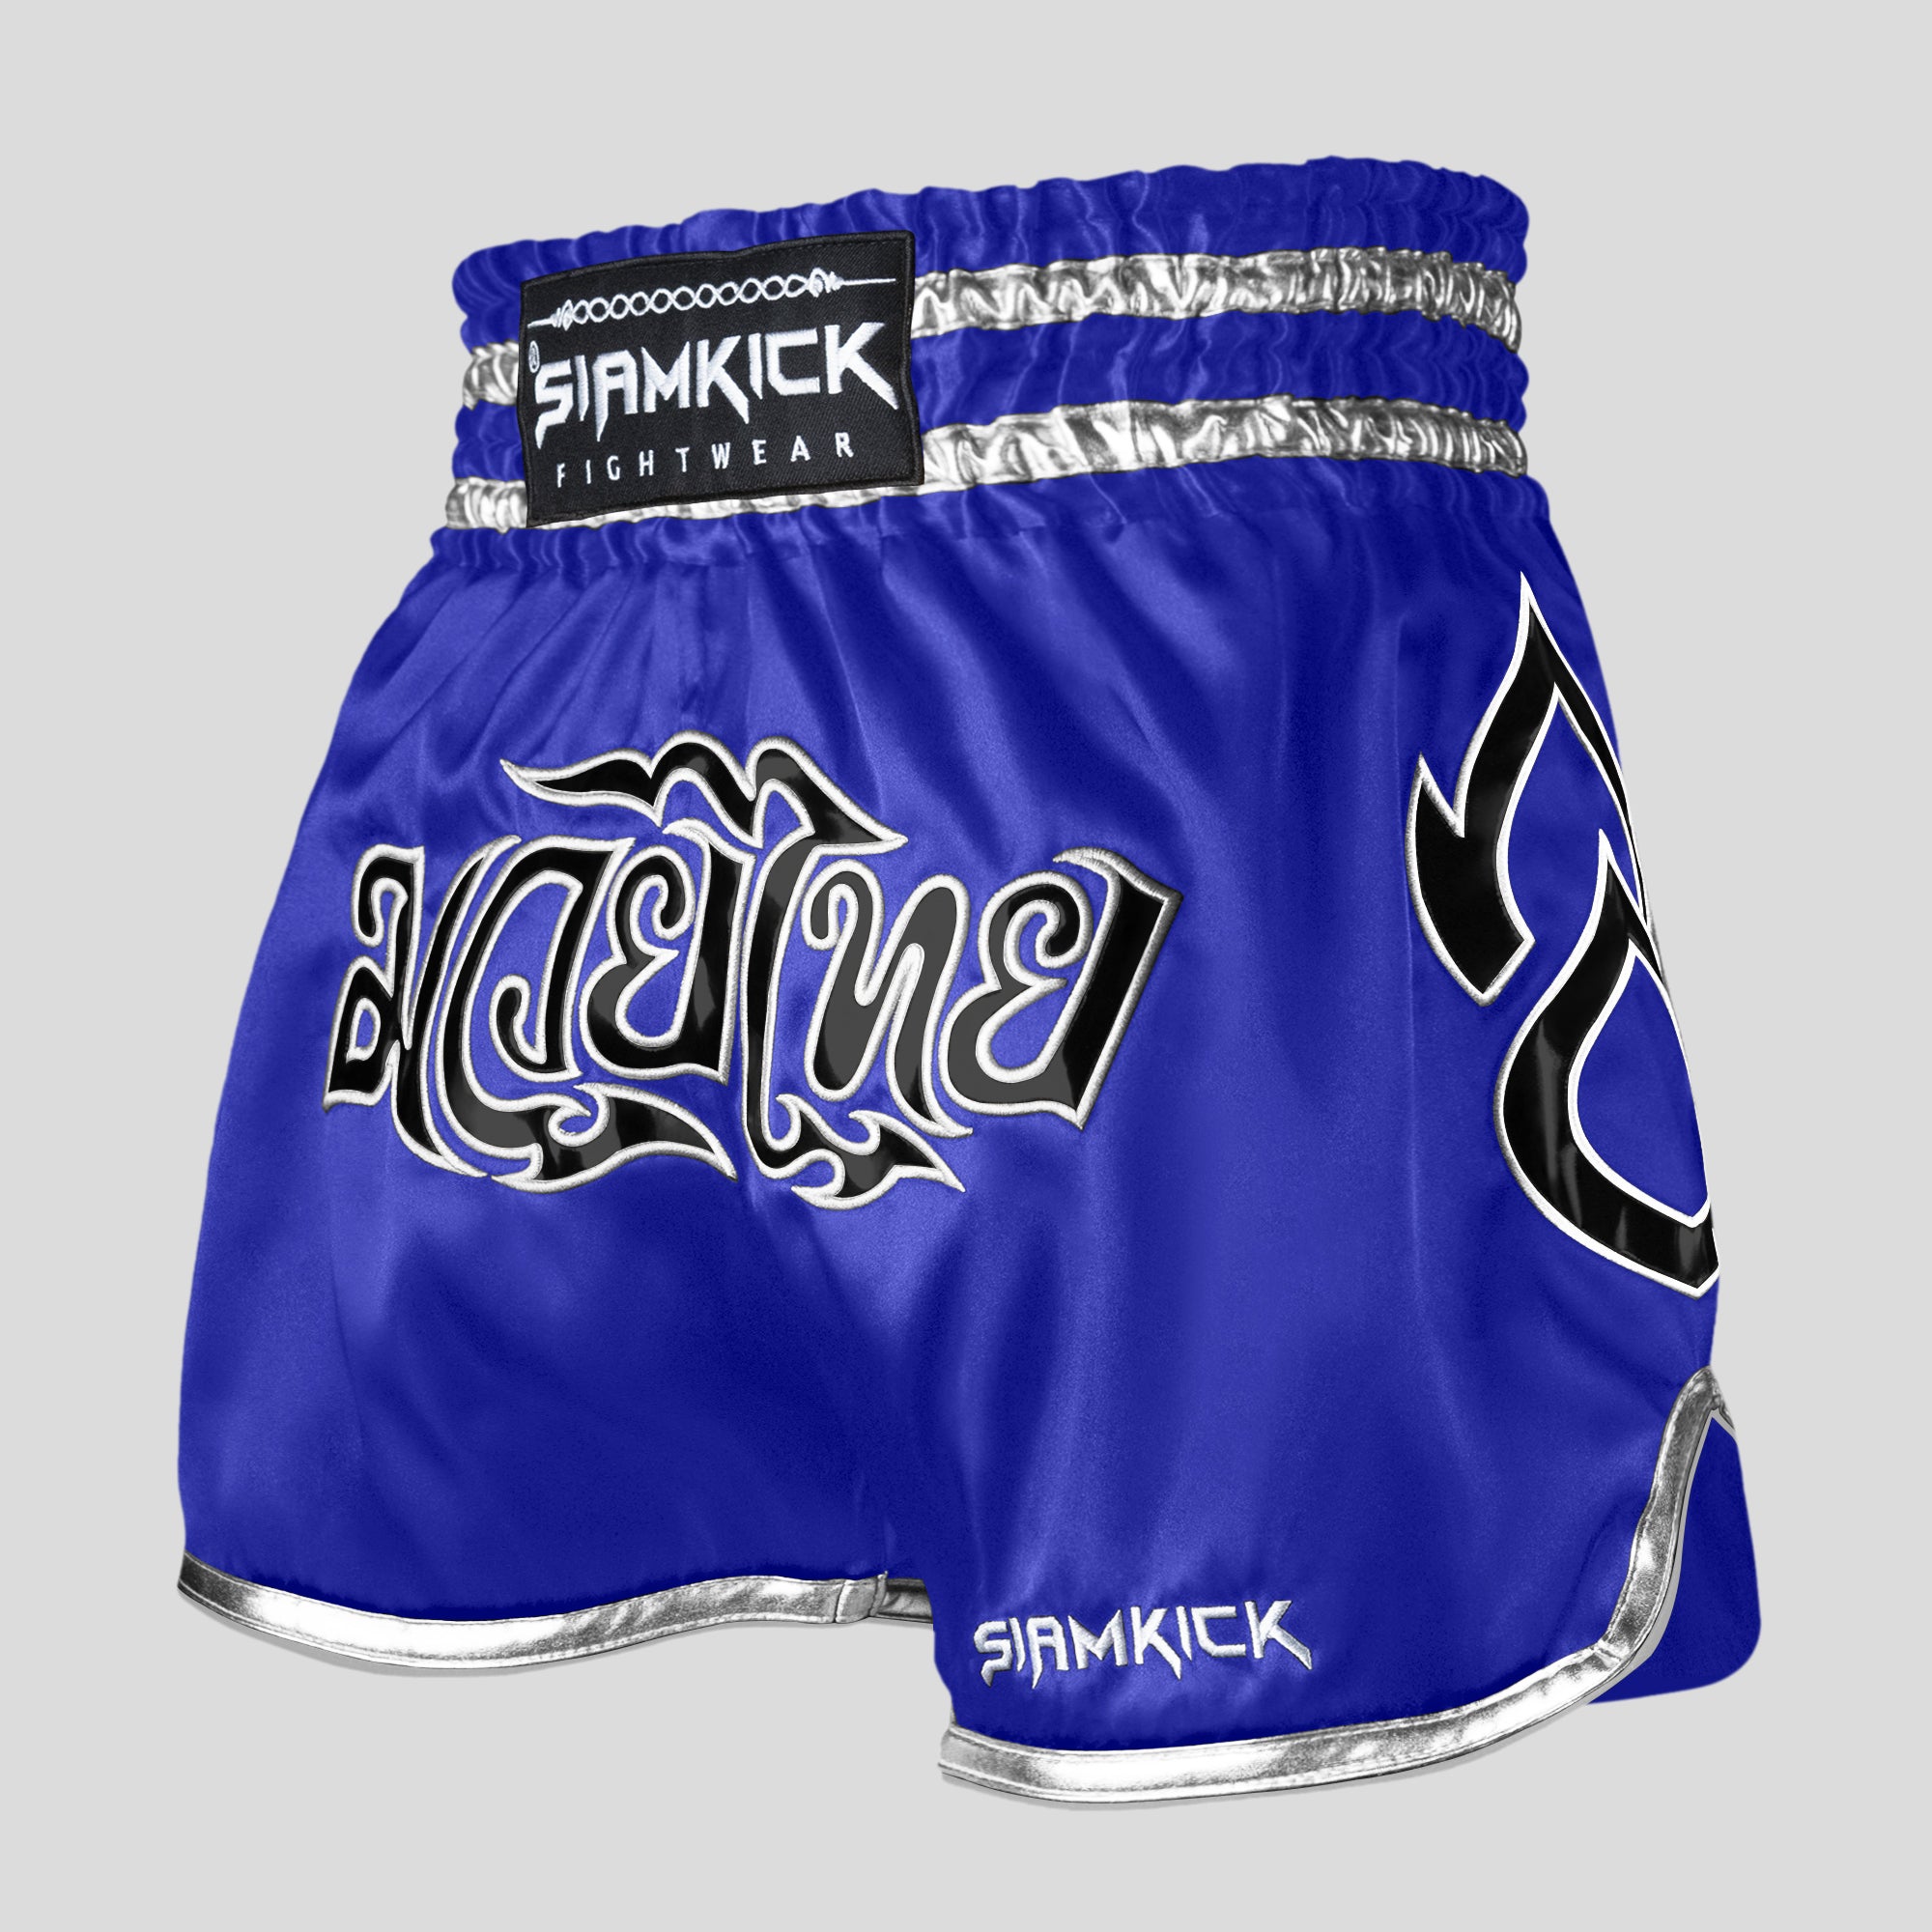 Blue and Silver Muay Thai Shorts